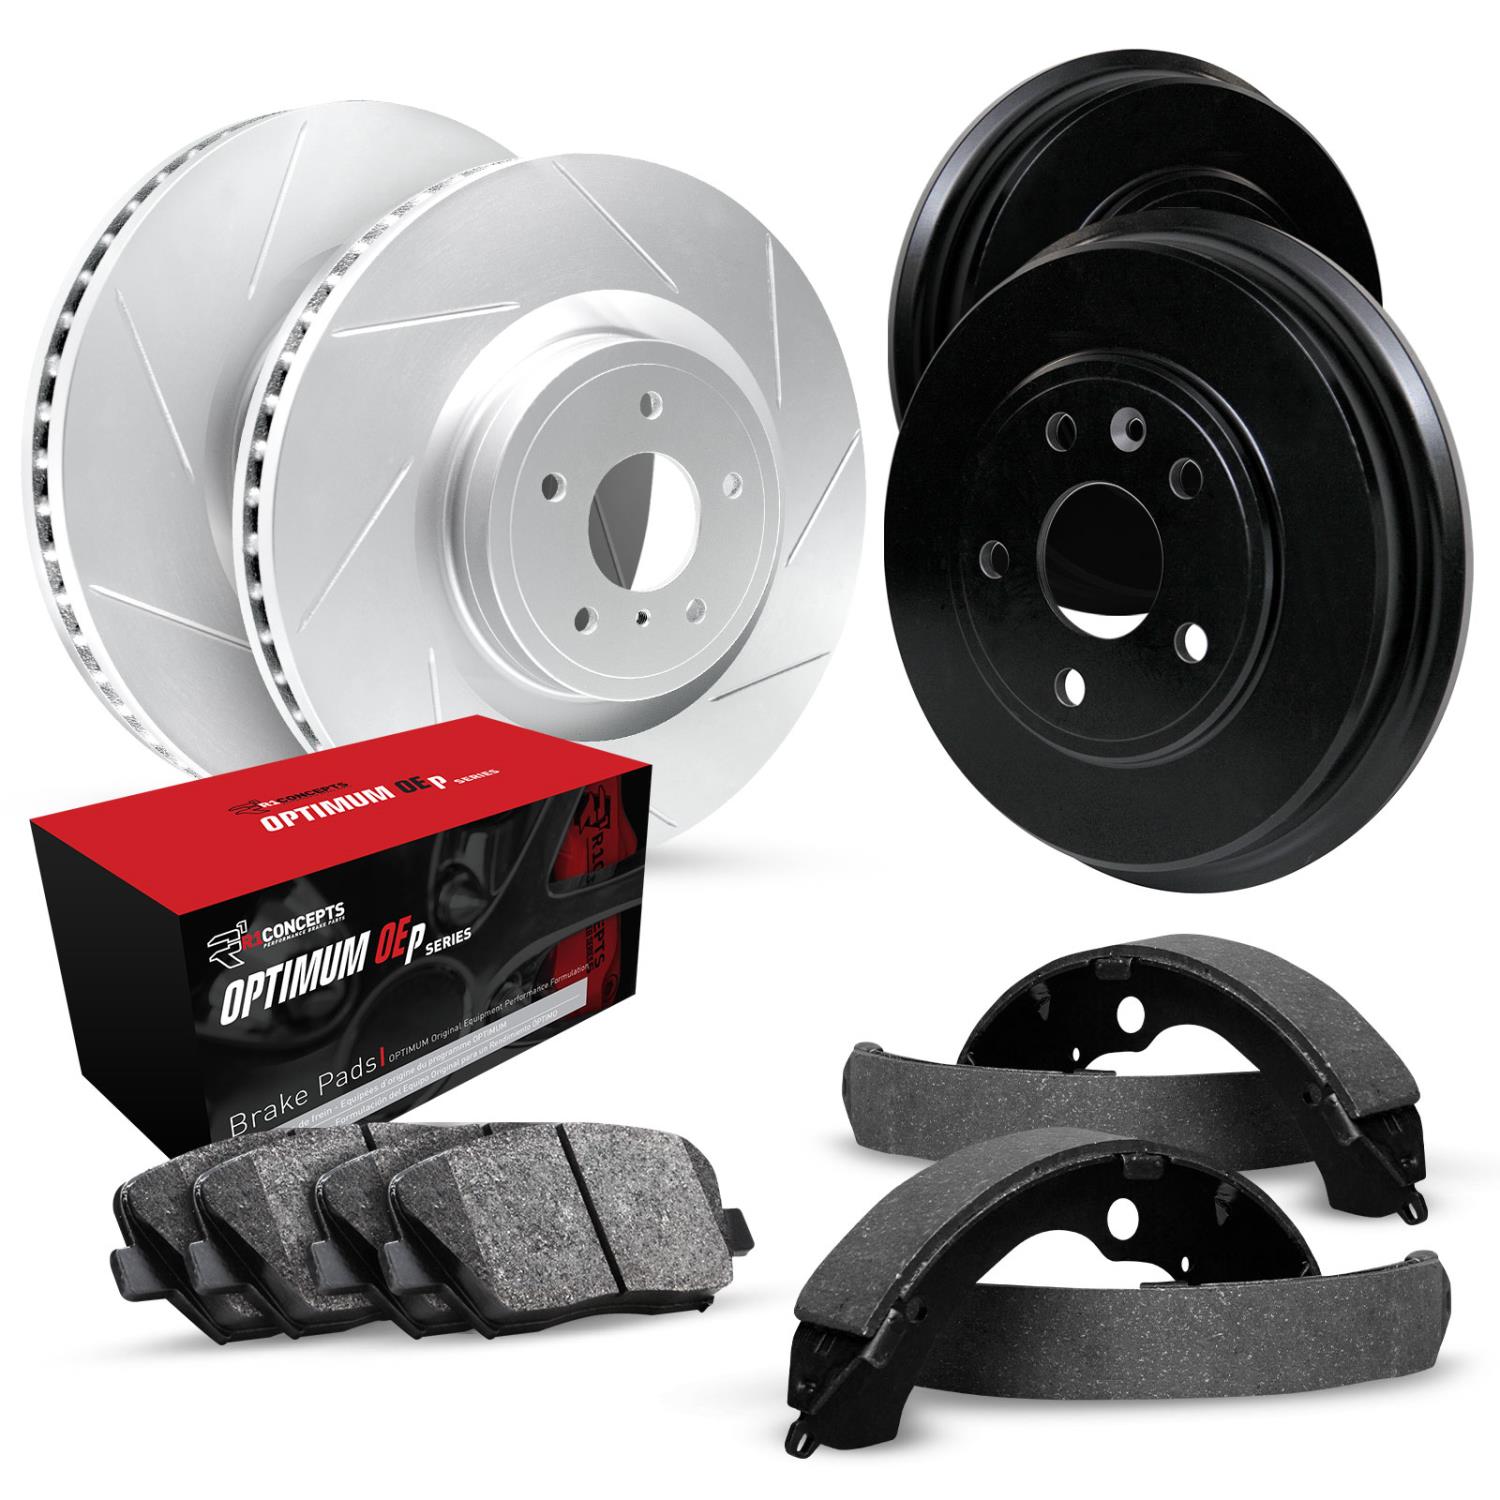 GEO-Carbon Slotted Brake Rotor & Drum Set w/Optimum OE Pads & Shoes, 2010-2013 Ford/Lincoln/Mercury/Mazda